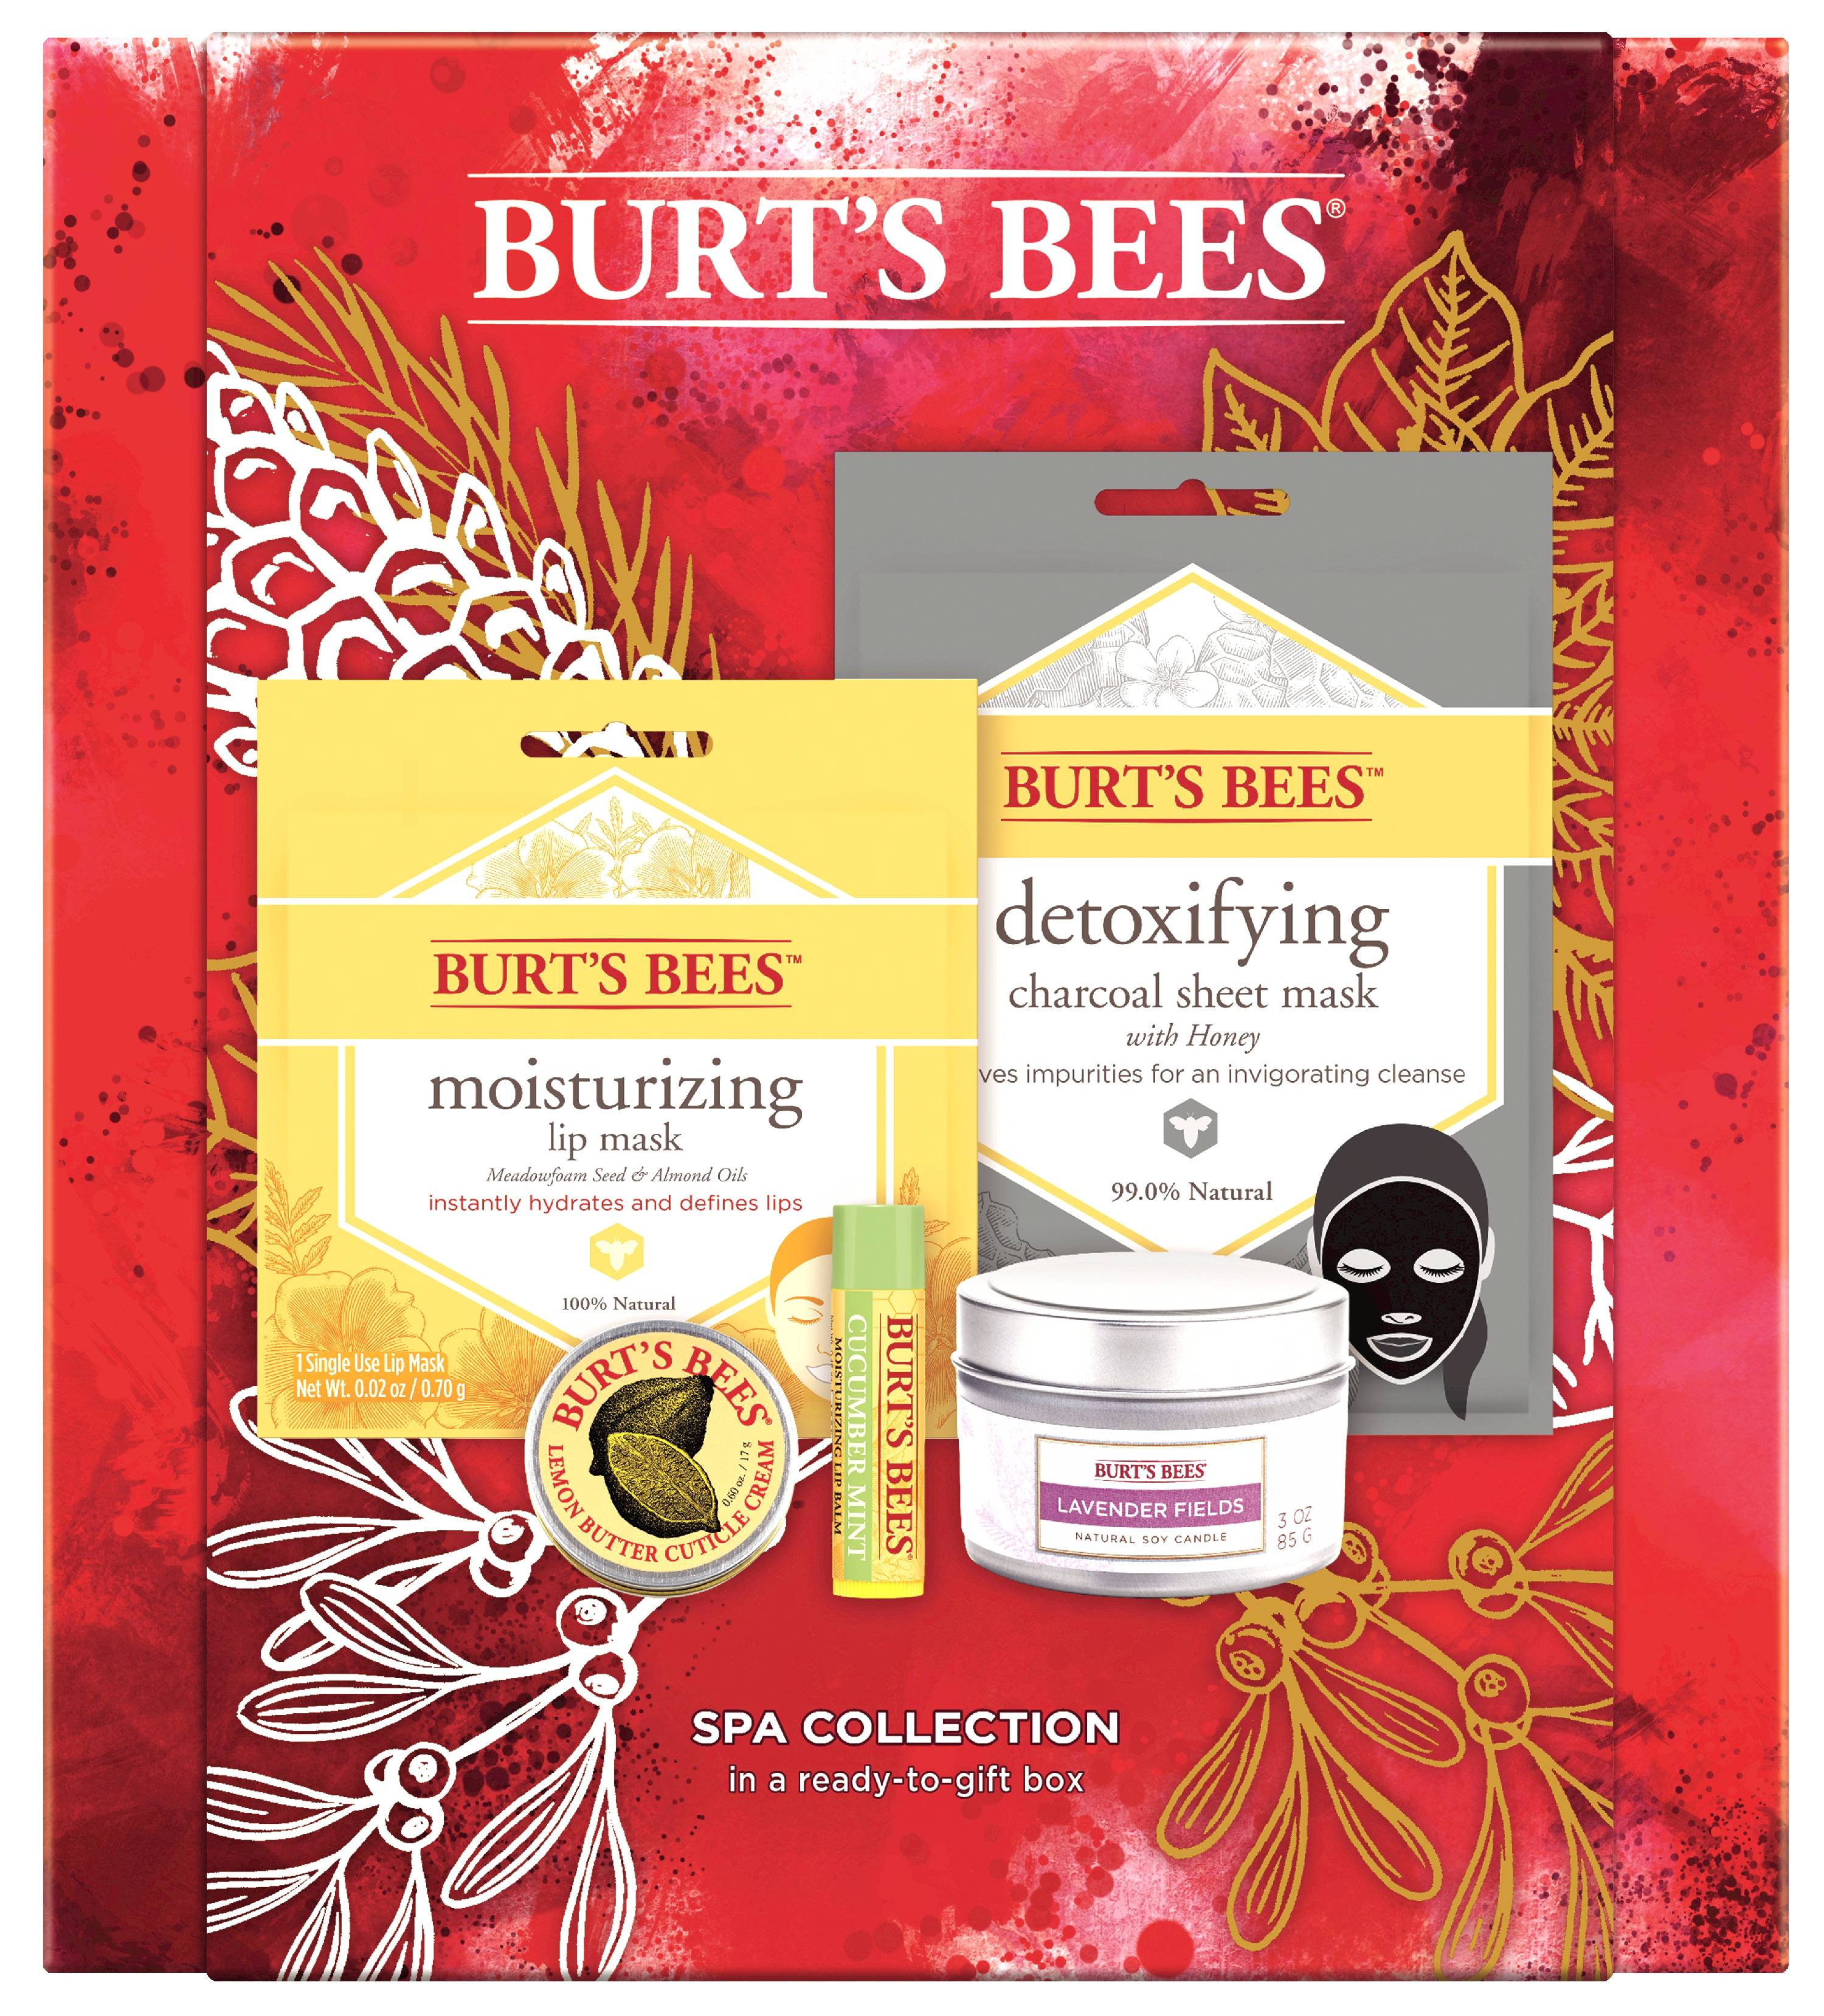 Burt's Bees Spa Collection Holiday Gift Set, 5 Products - Mini Candle, Lip Mask, Lip Balm, Face Mask and Cuticle Cream - image 1 of 3